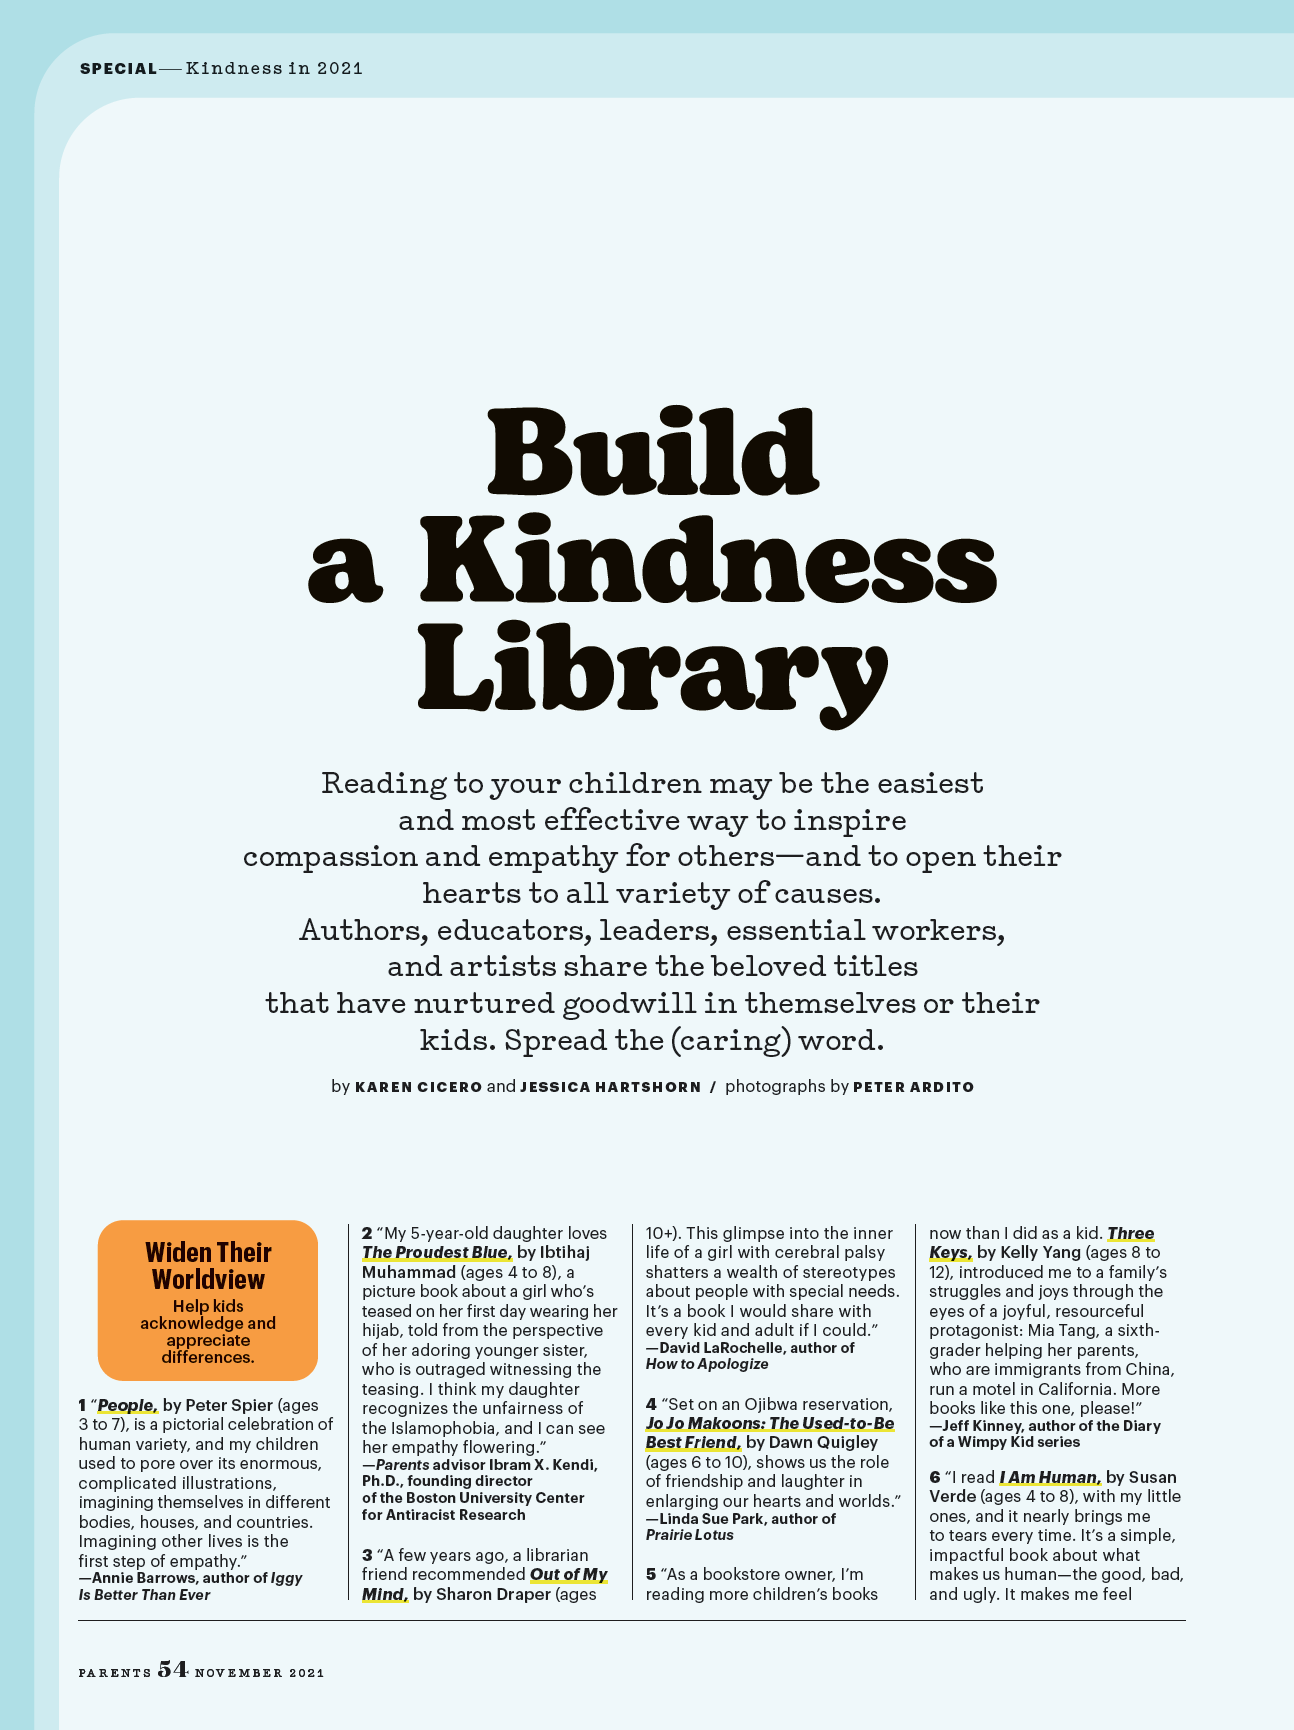 Todd Parr - Parents Magazine screencap of 'Build a Kindness Library' page